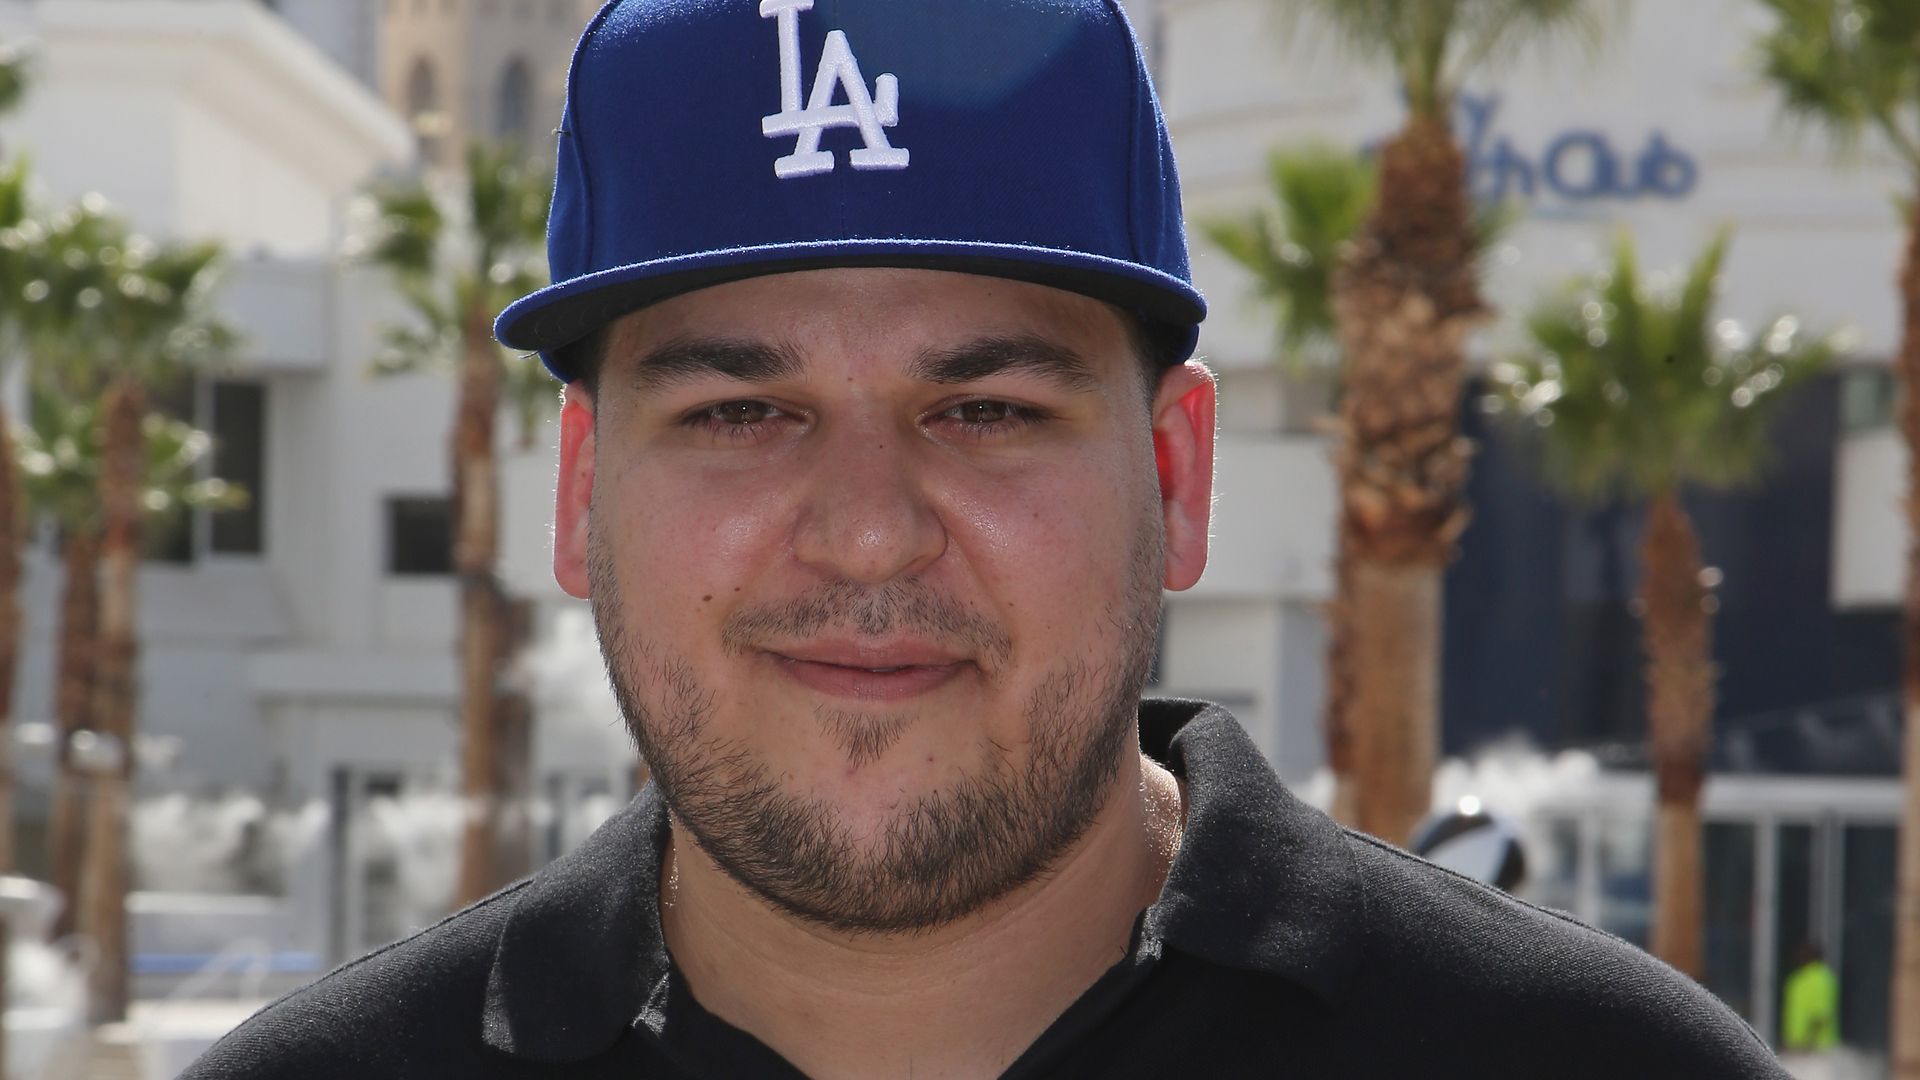 LAS VEGAS, NV - MAY 28:  Television personality Rob Kardashian attends the Sky Beach Club at the Tropicana Las Vegas on May 28, 2016 in Las Vegas, Nevada.  (Photo by Gabe Ginsberg/Getty Images)